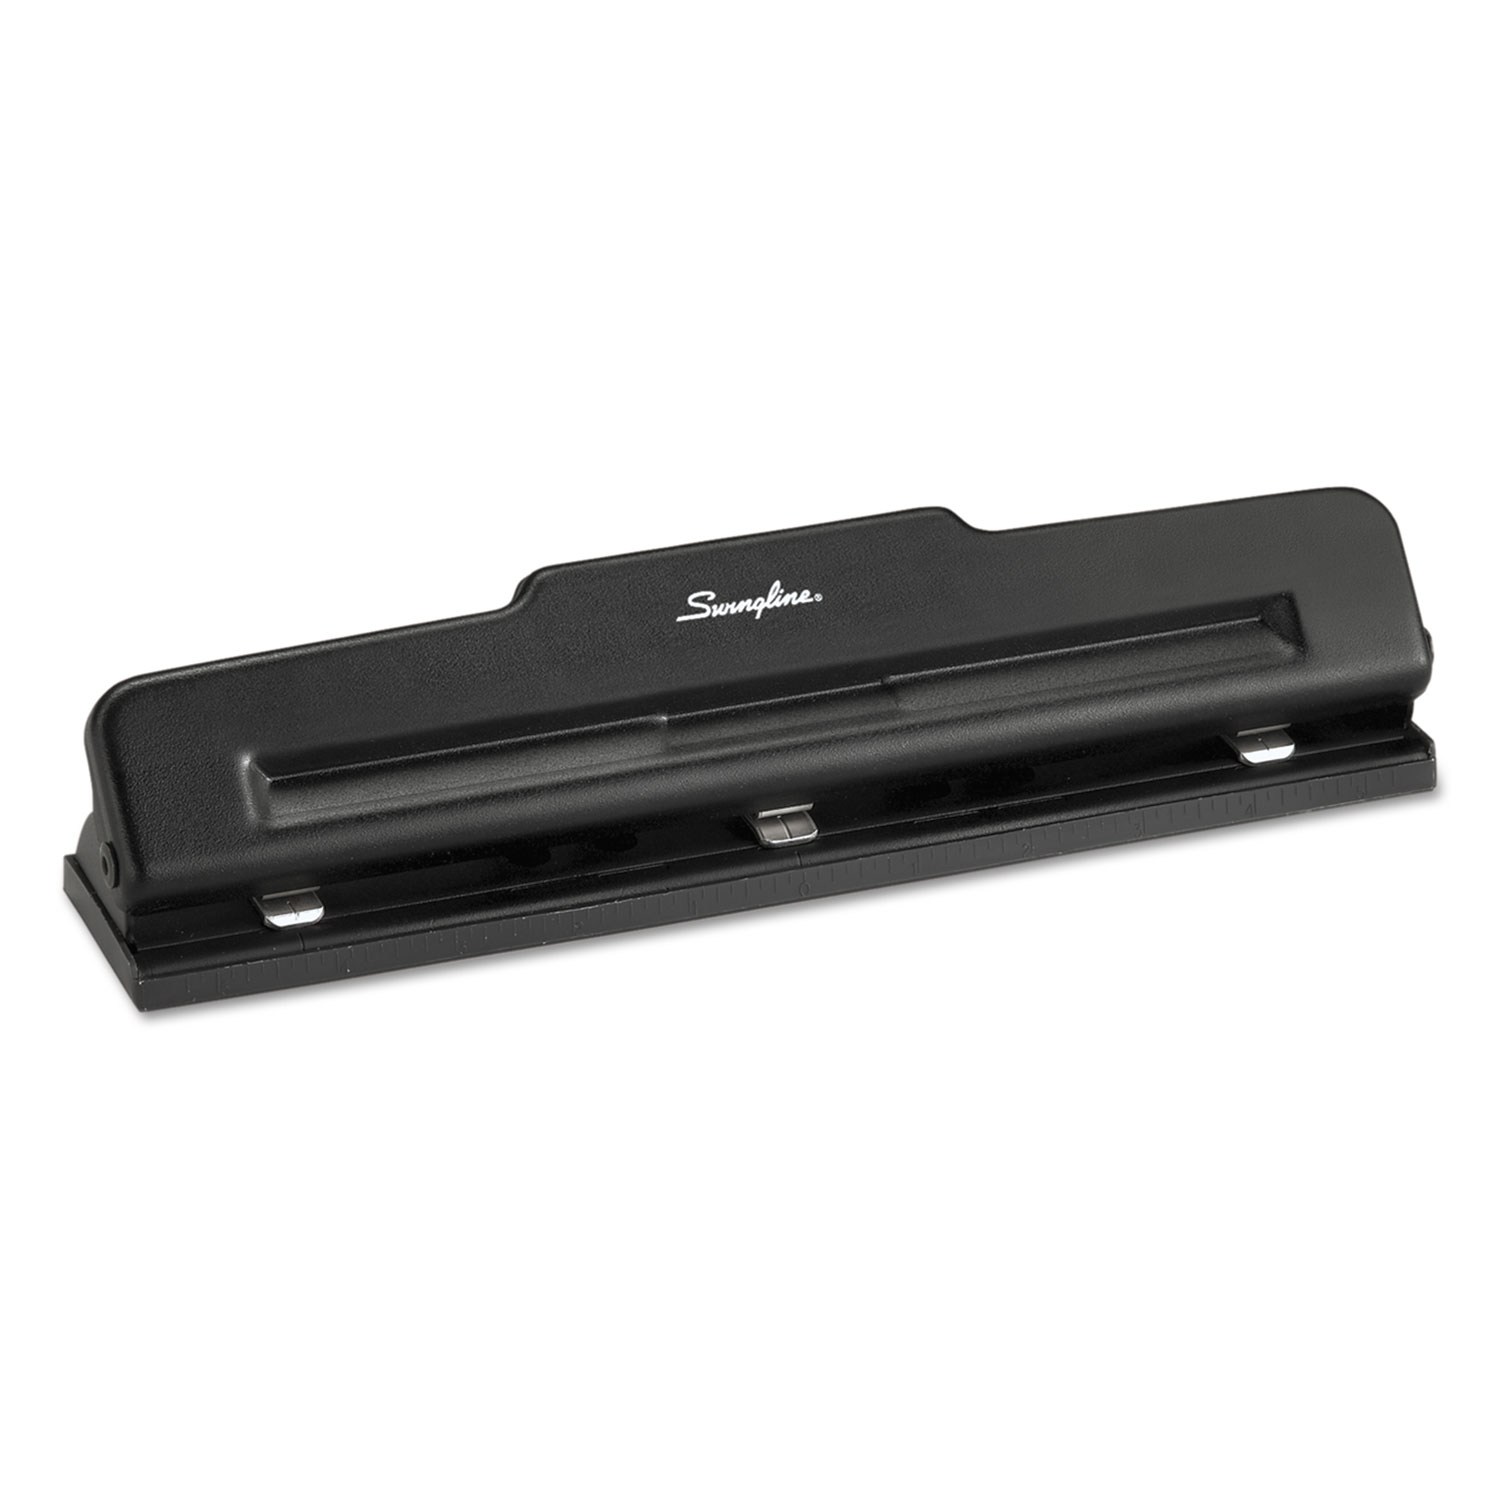 10-Sheet Desktop Two-to-Three-Hole Adjustable Punch, 9/32" Holes, Black